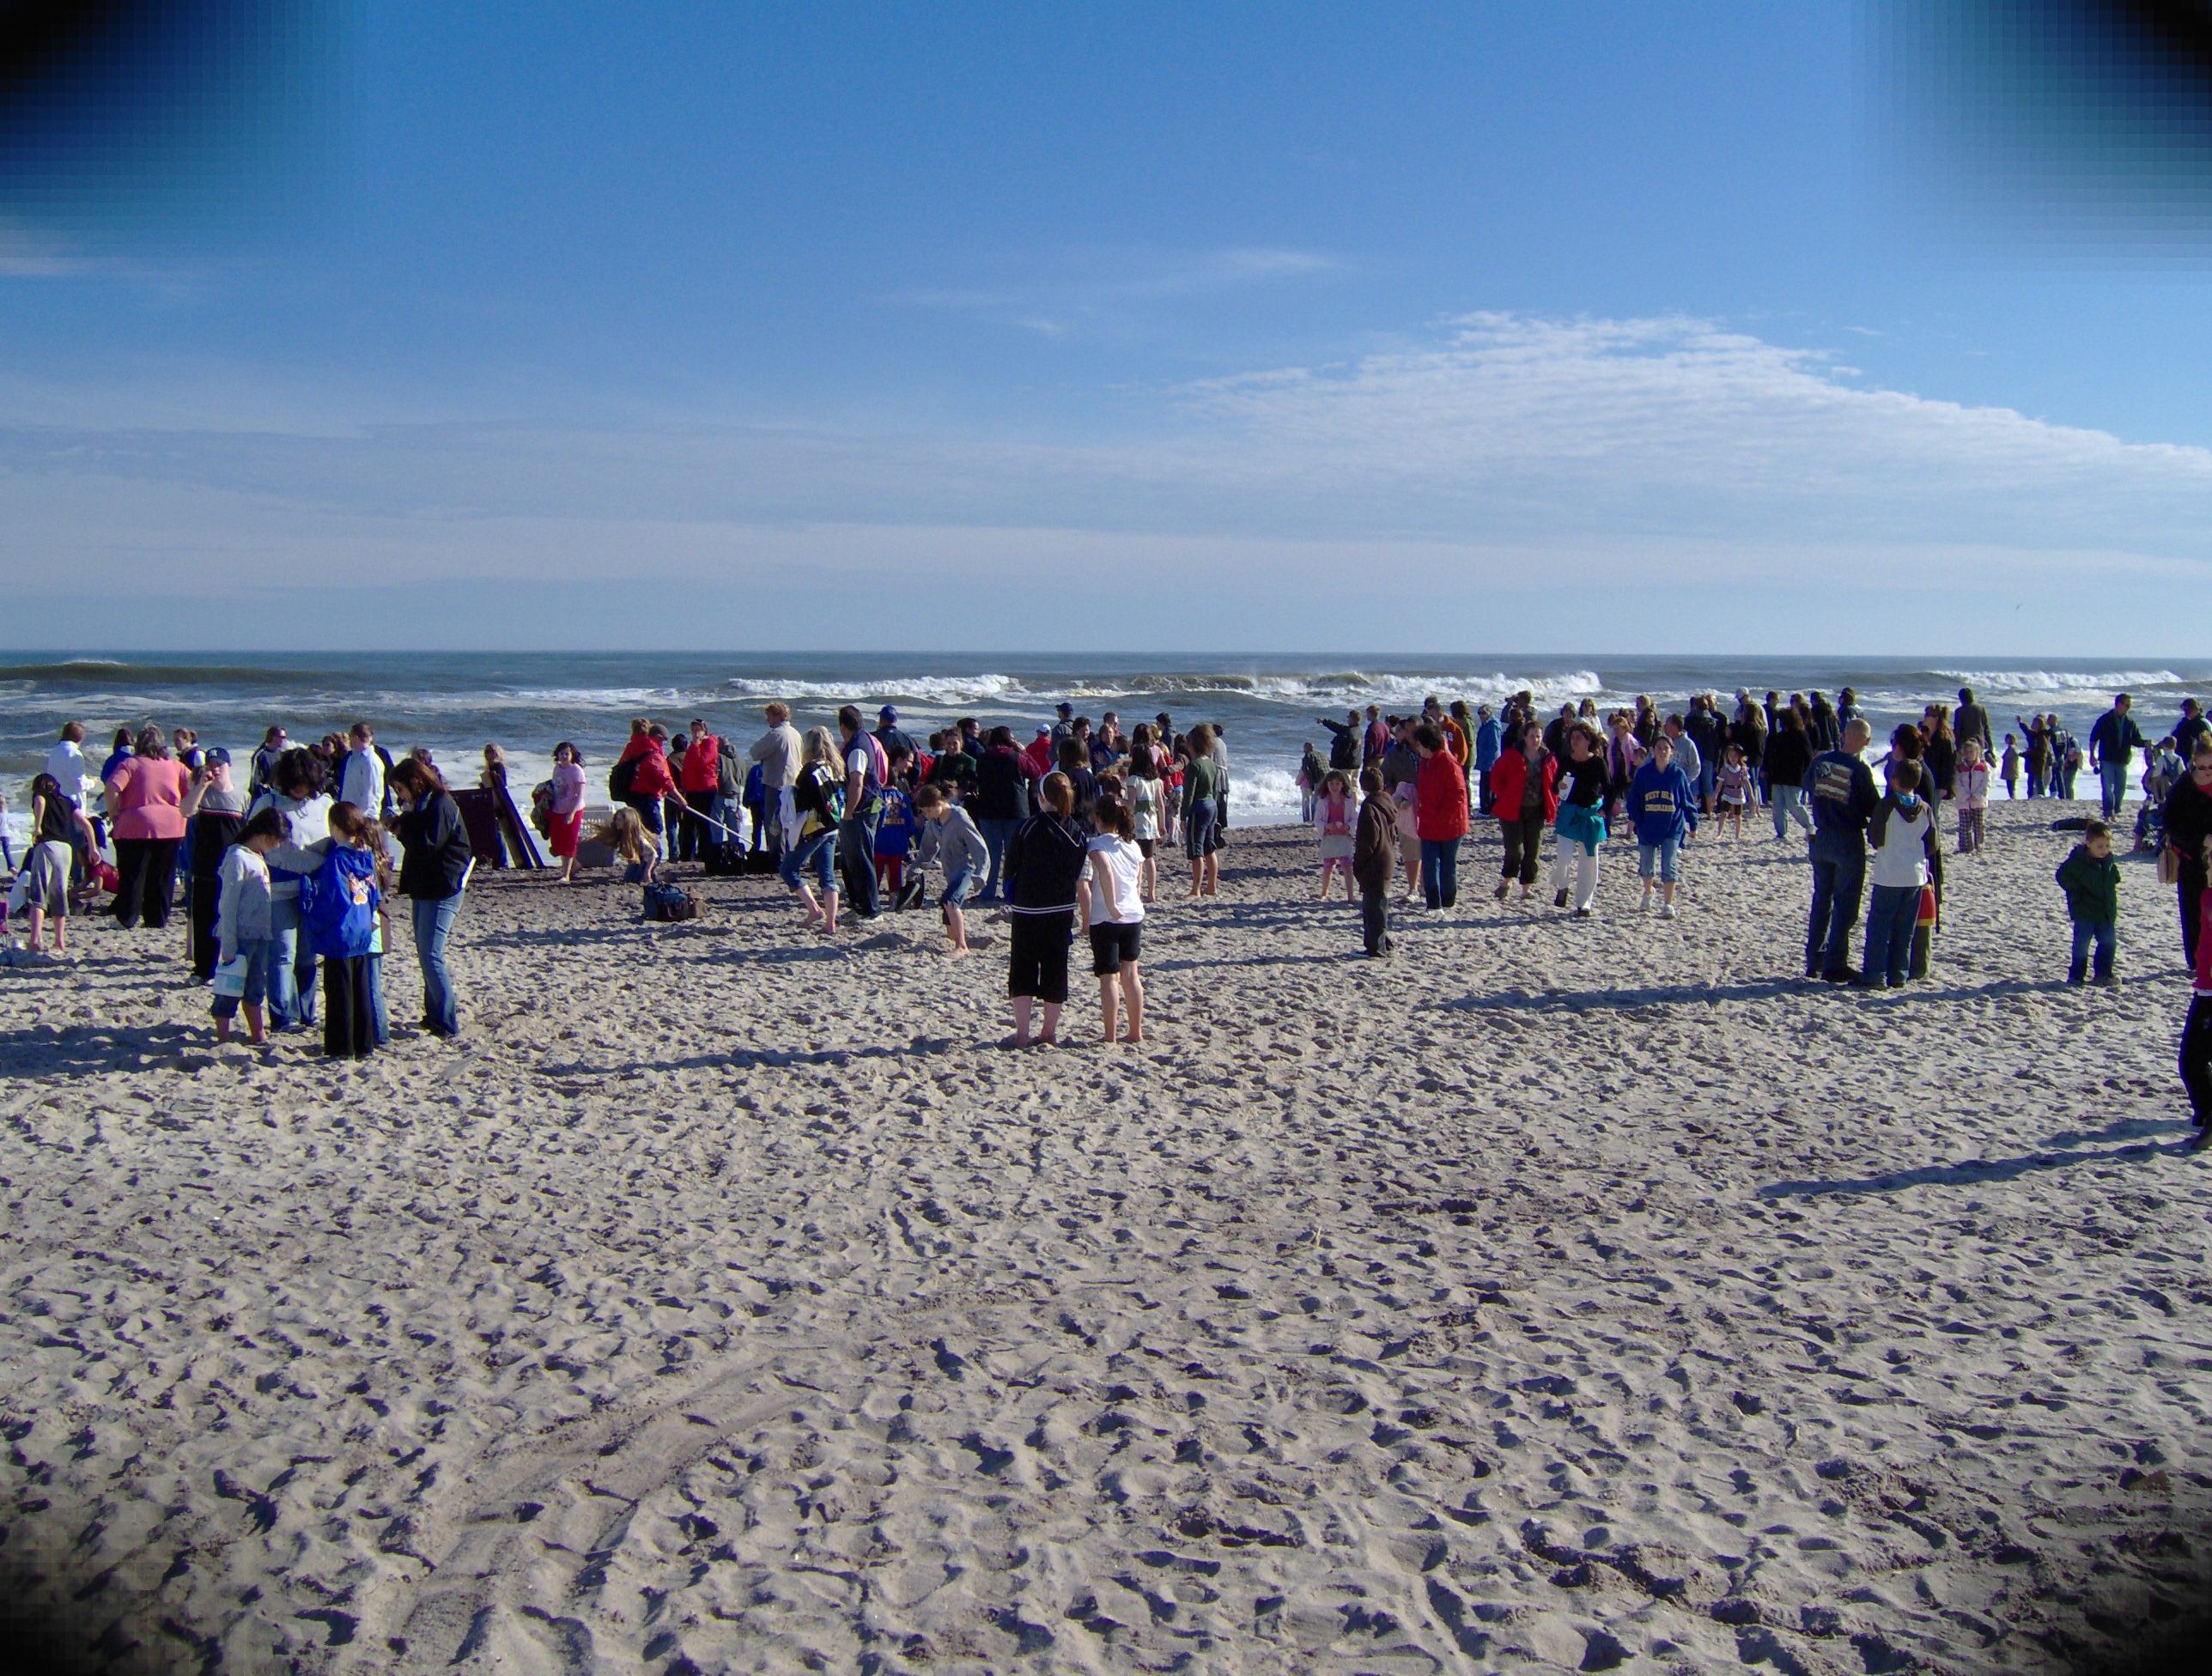 This was the crowd that stayed after the seals swam away